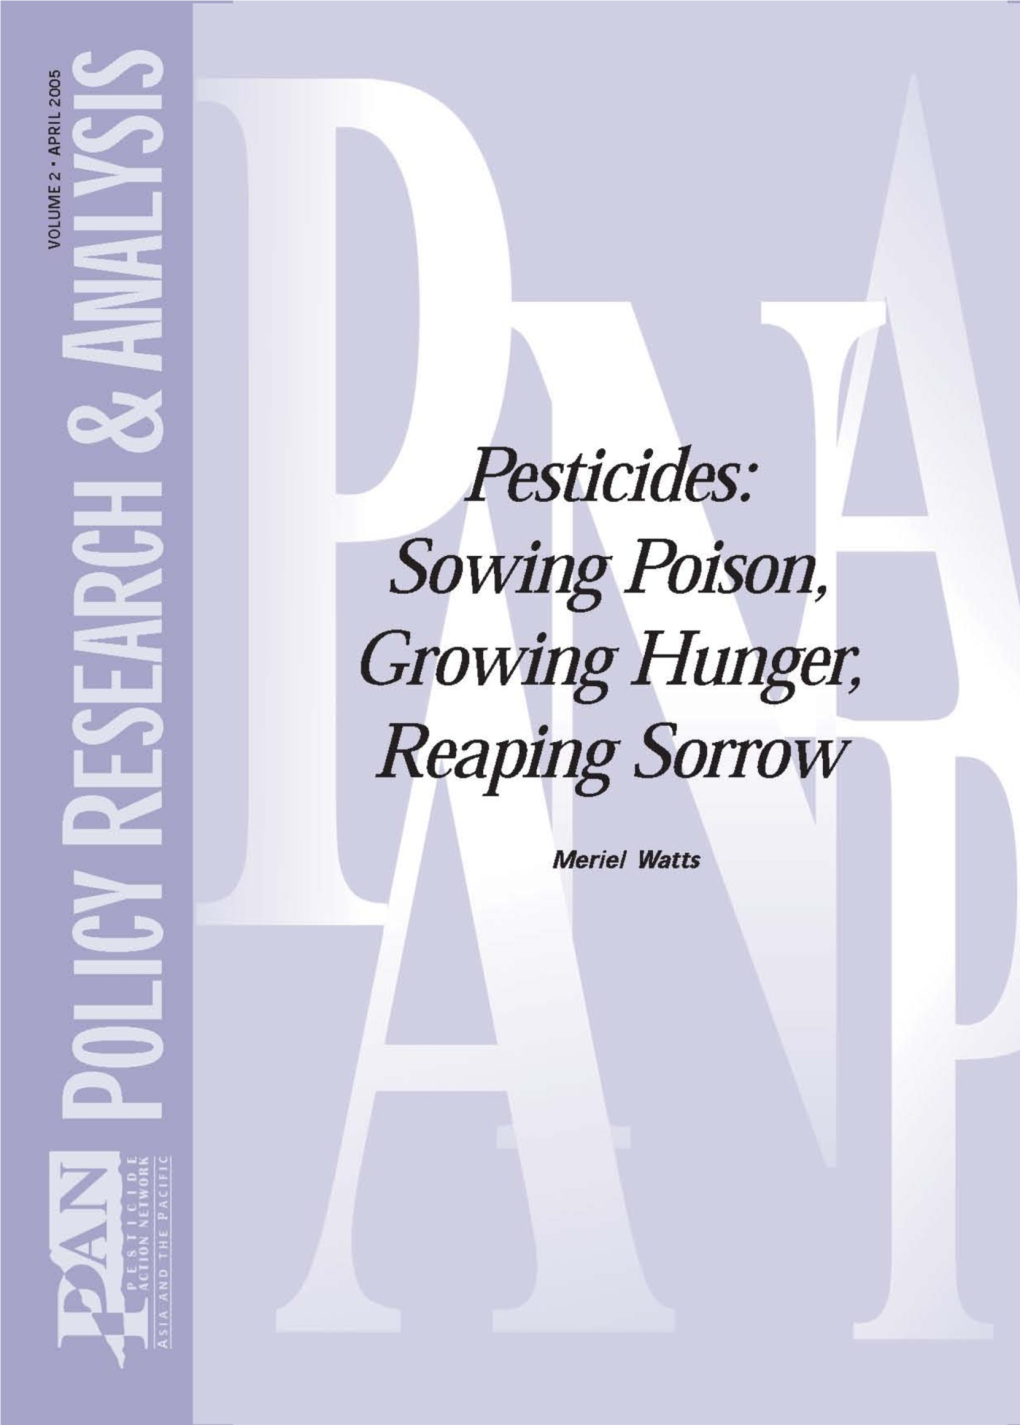 Pesticides: Sowing Poisons, Growing Hunger, Reaping Sorrow